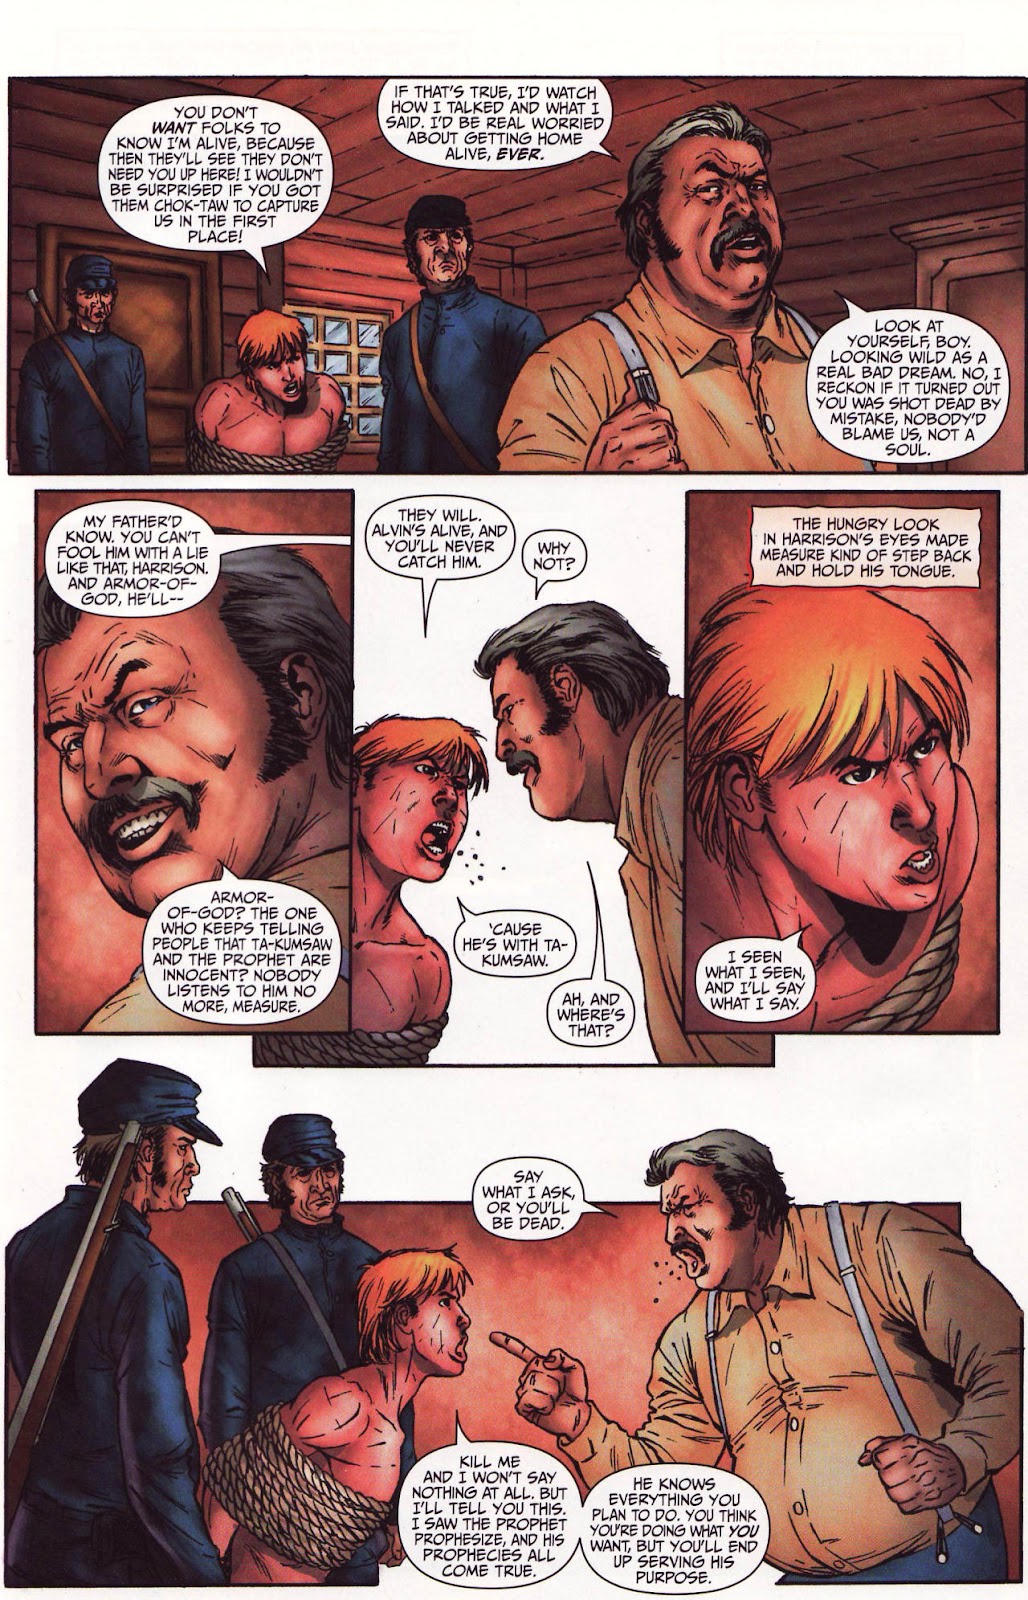 Red Prophet: The Tales of Alvin Maker issue 8 - Page 11